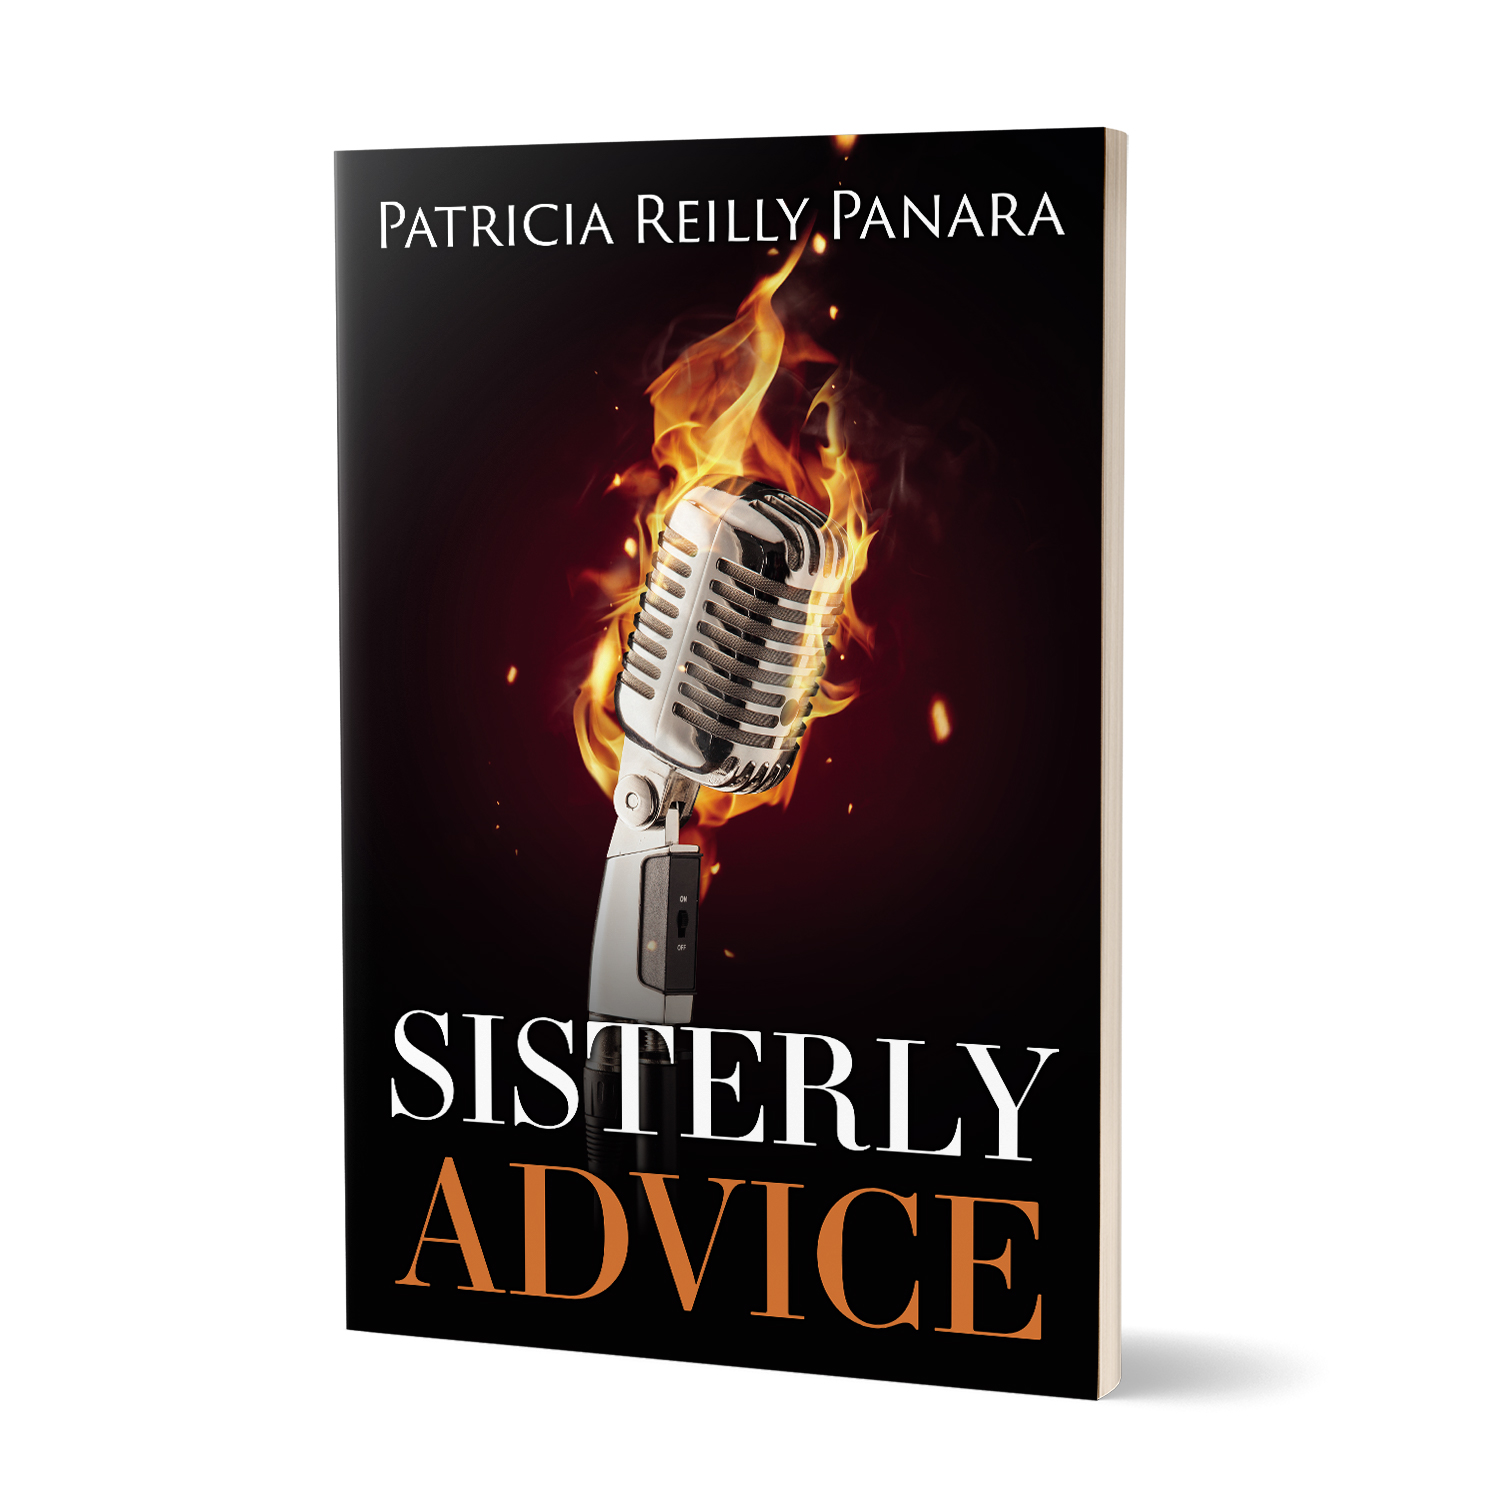 'Sisterly Advice' is the fictional, faith-based story of popular Nun DJ. The author is Patricia Reilly Panara. The book cover and interior were designed by Mark Thomas, of coverness.com. To find out more about my book design services, please visit www.coverness.com.